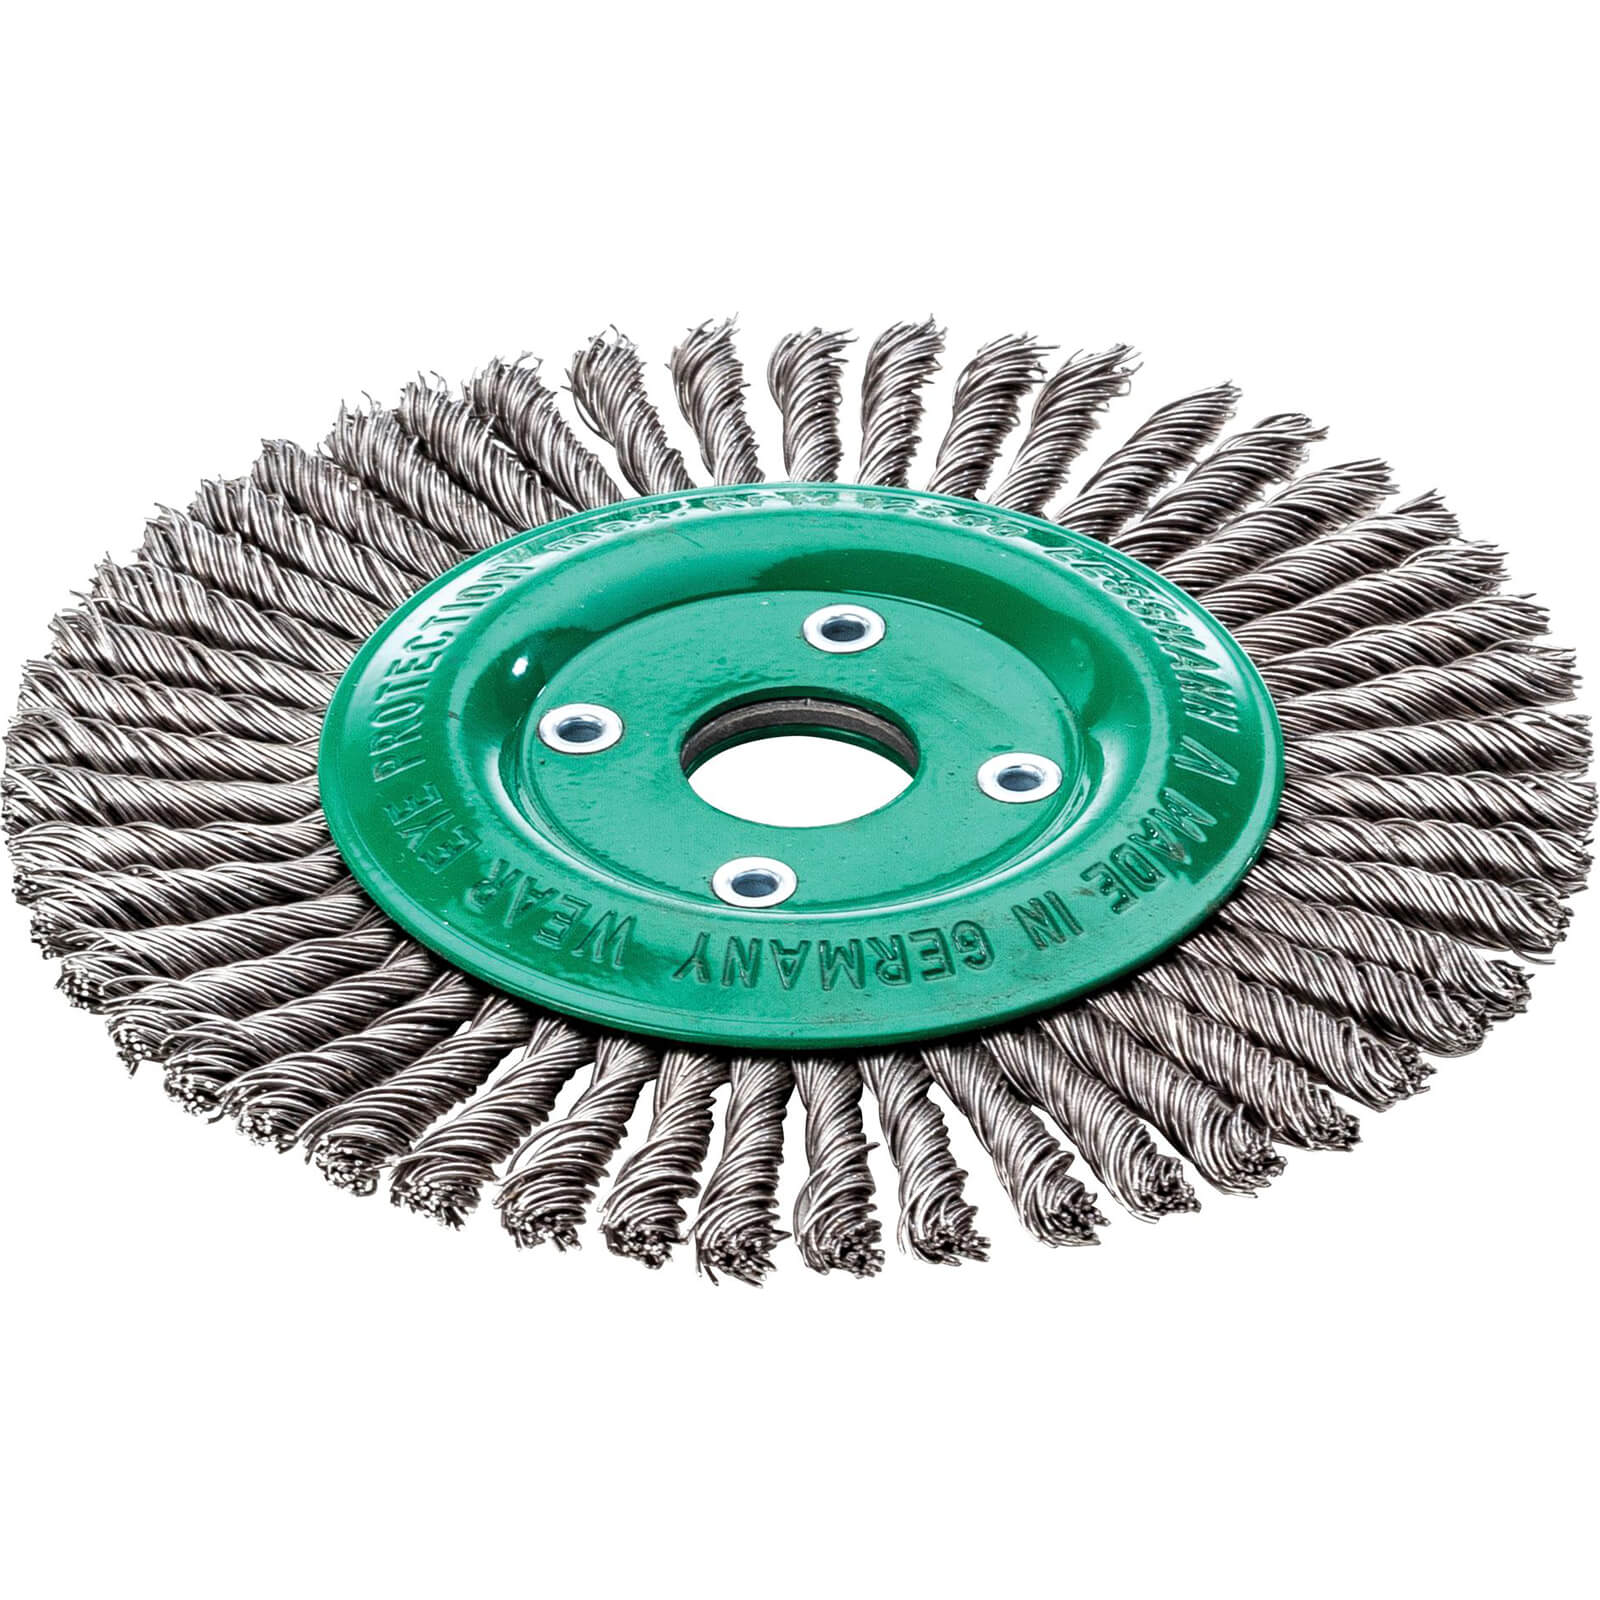 Image of Lessmann Pipeline Stainless Steel Wire Wheel Brush 178mm 22.2mm Bore